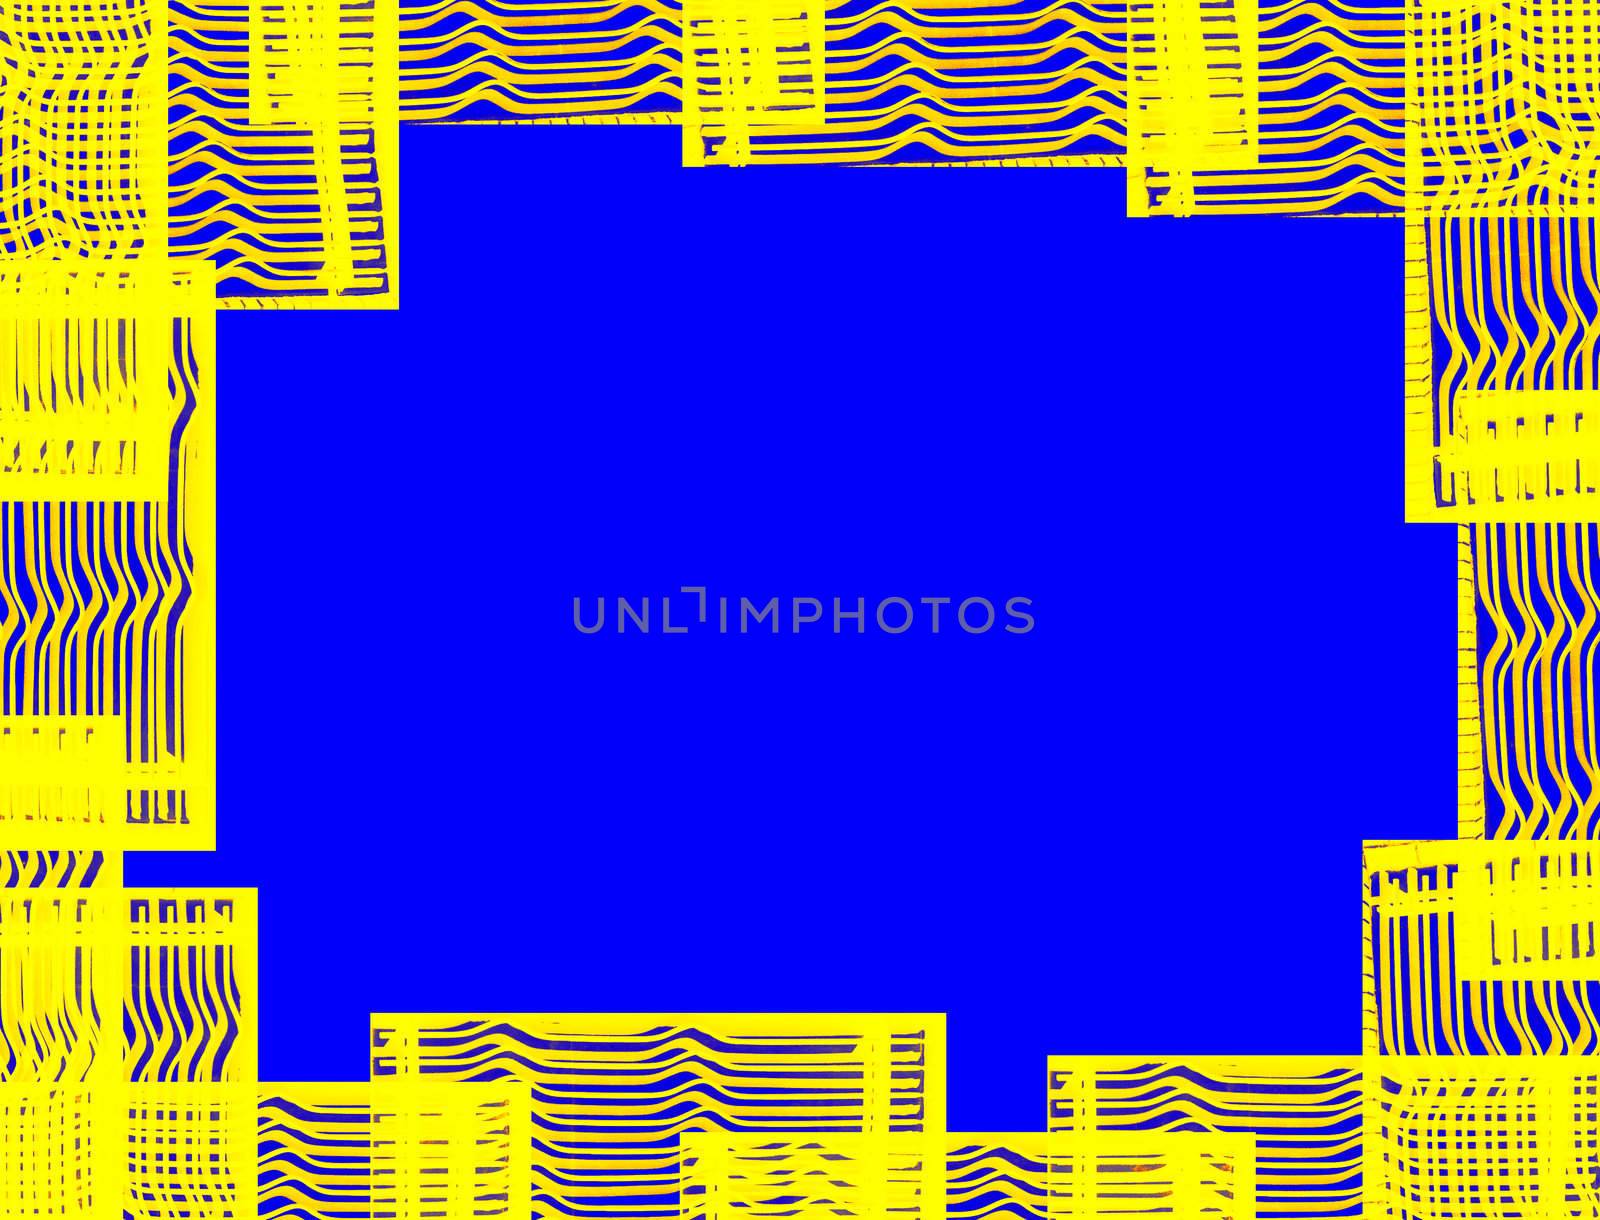 Blue with yellow border by tommroch